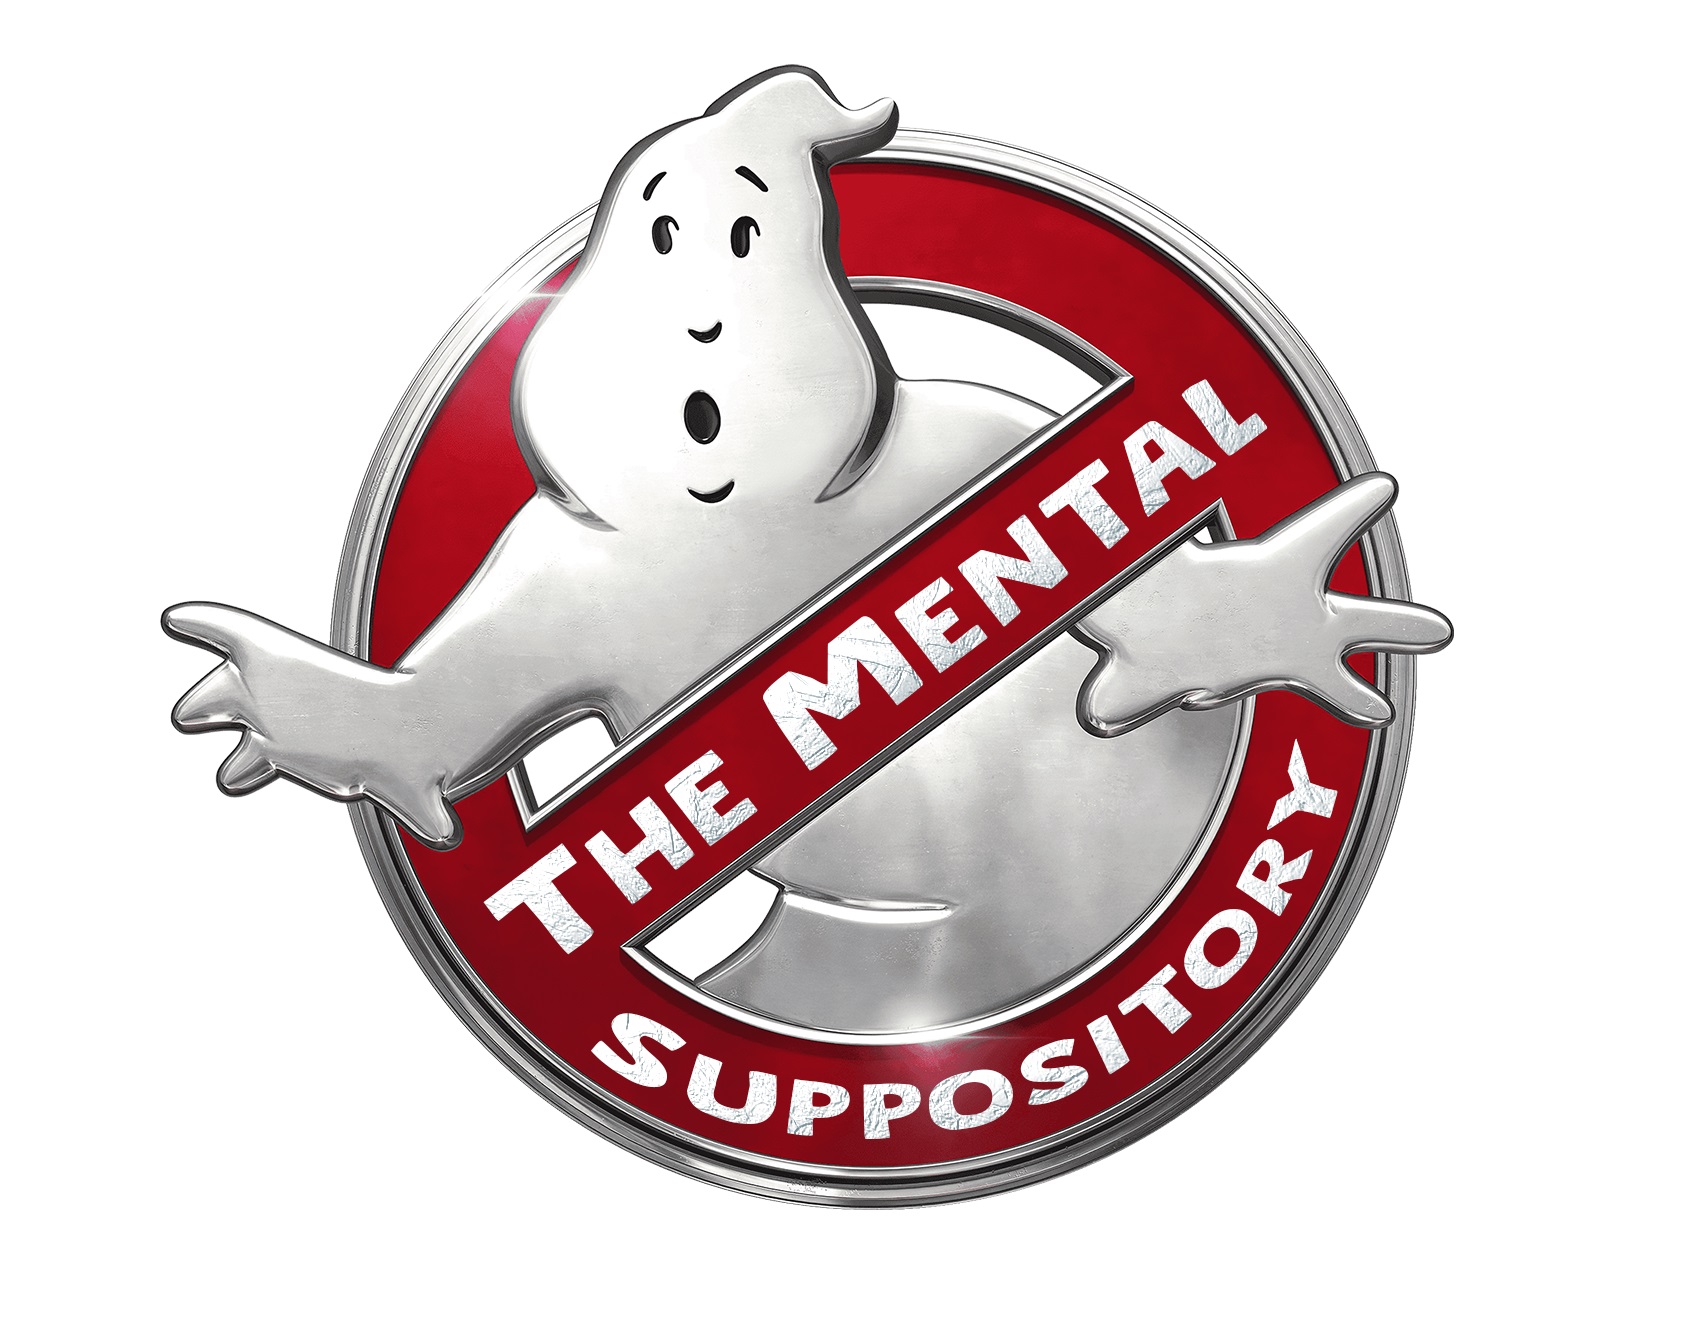 Original Full Color logo created by the mental suppository crew incorporating a ghost and restriction warning sign.